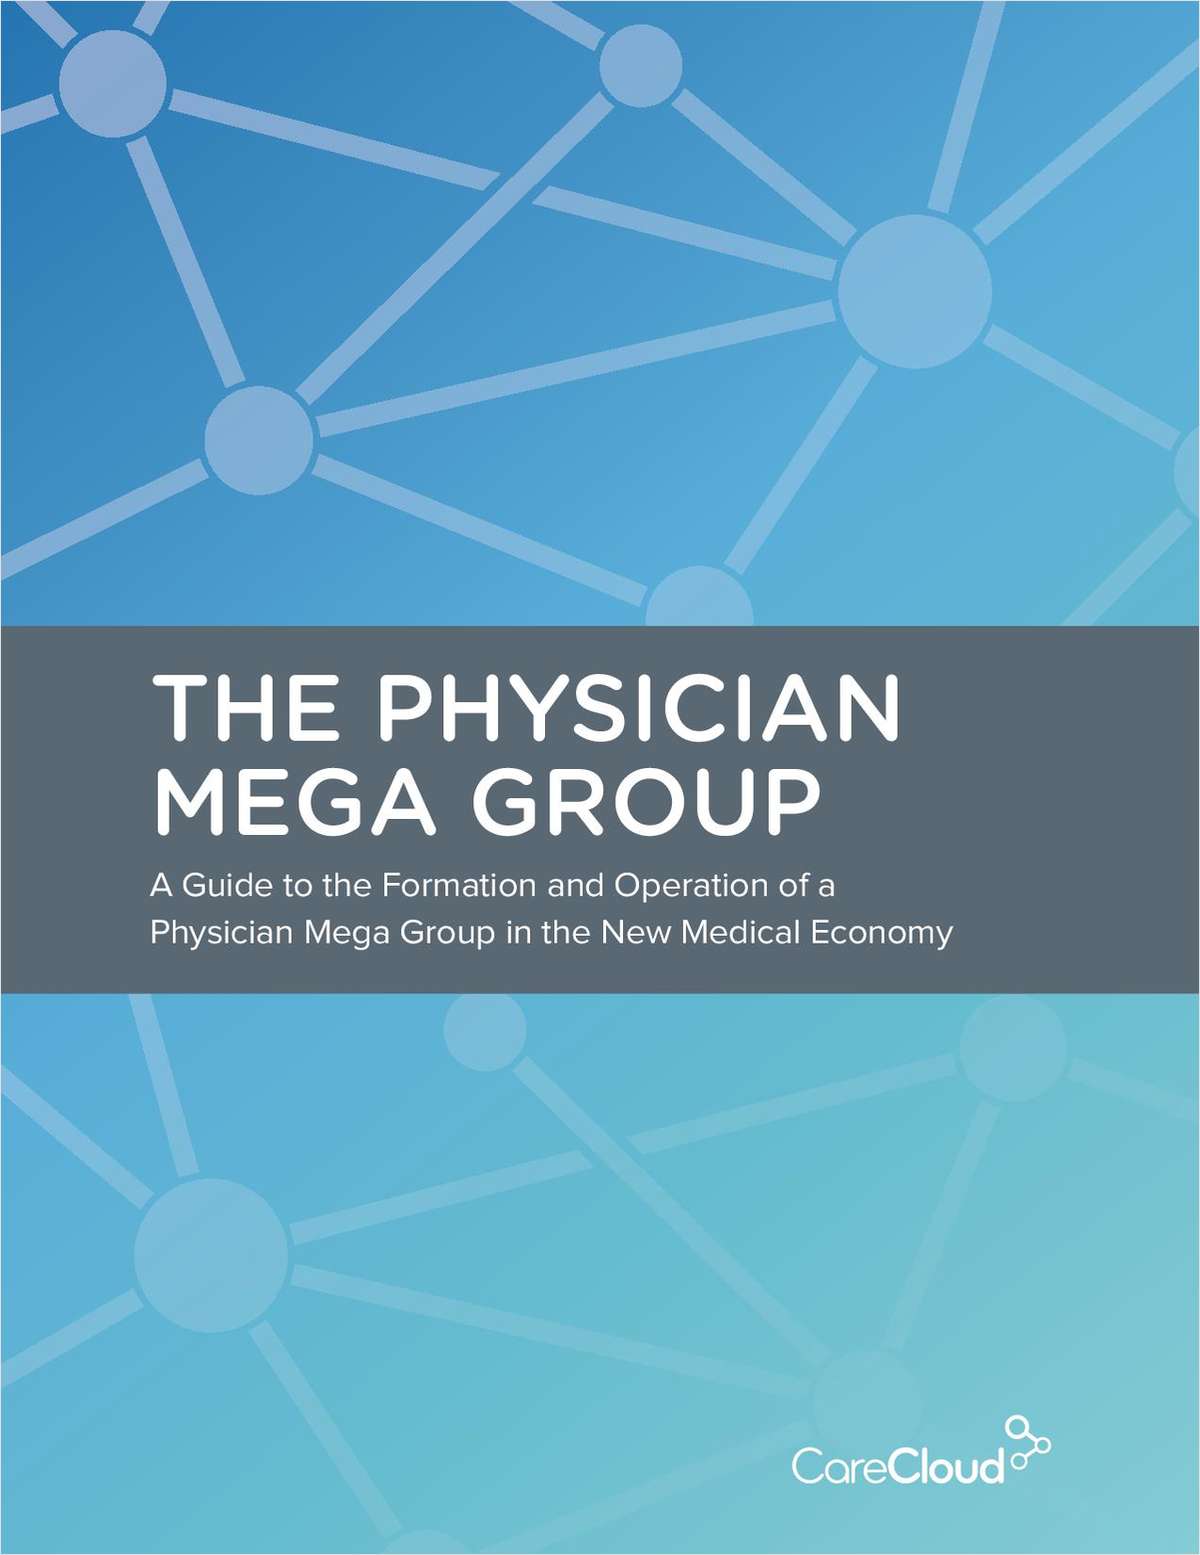 The Physician Mega Group: A Formation and Operations Guide